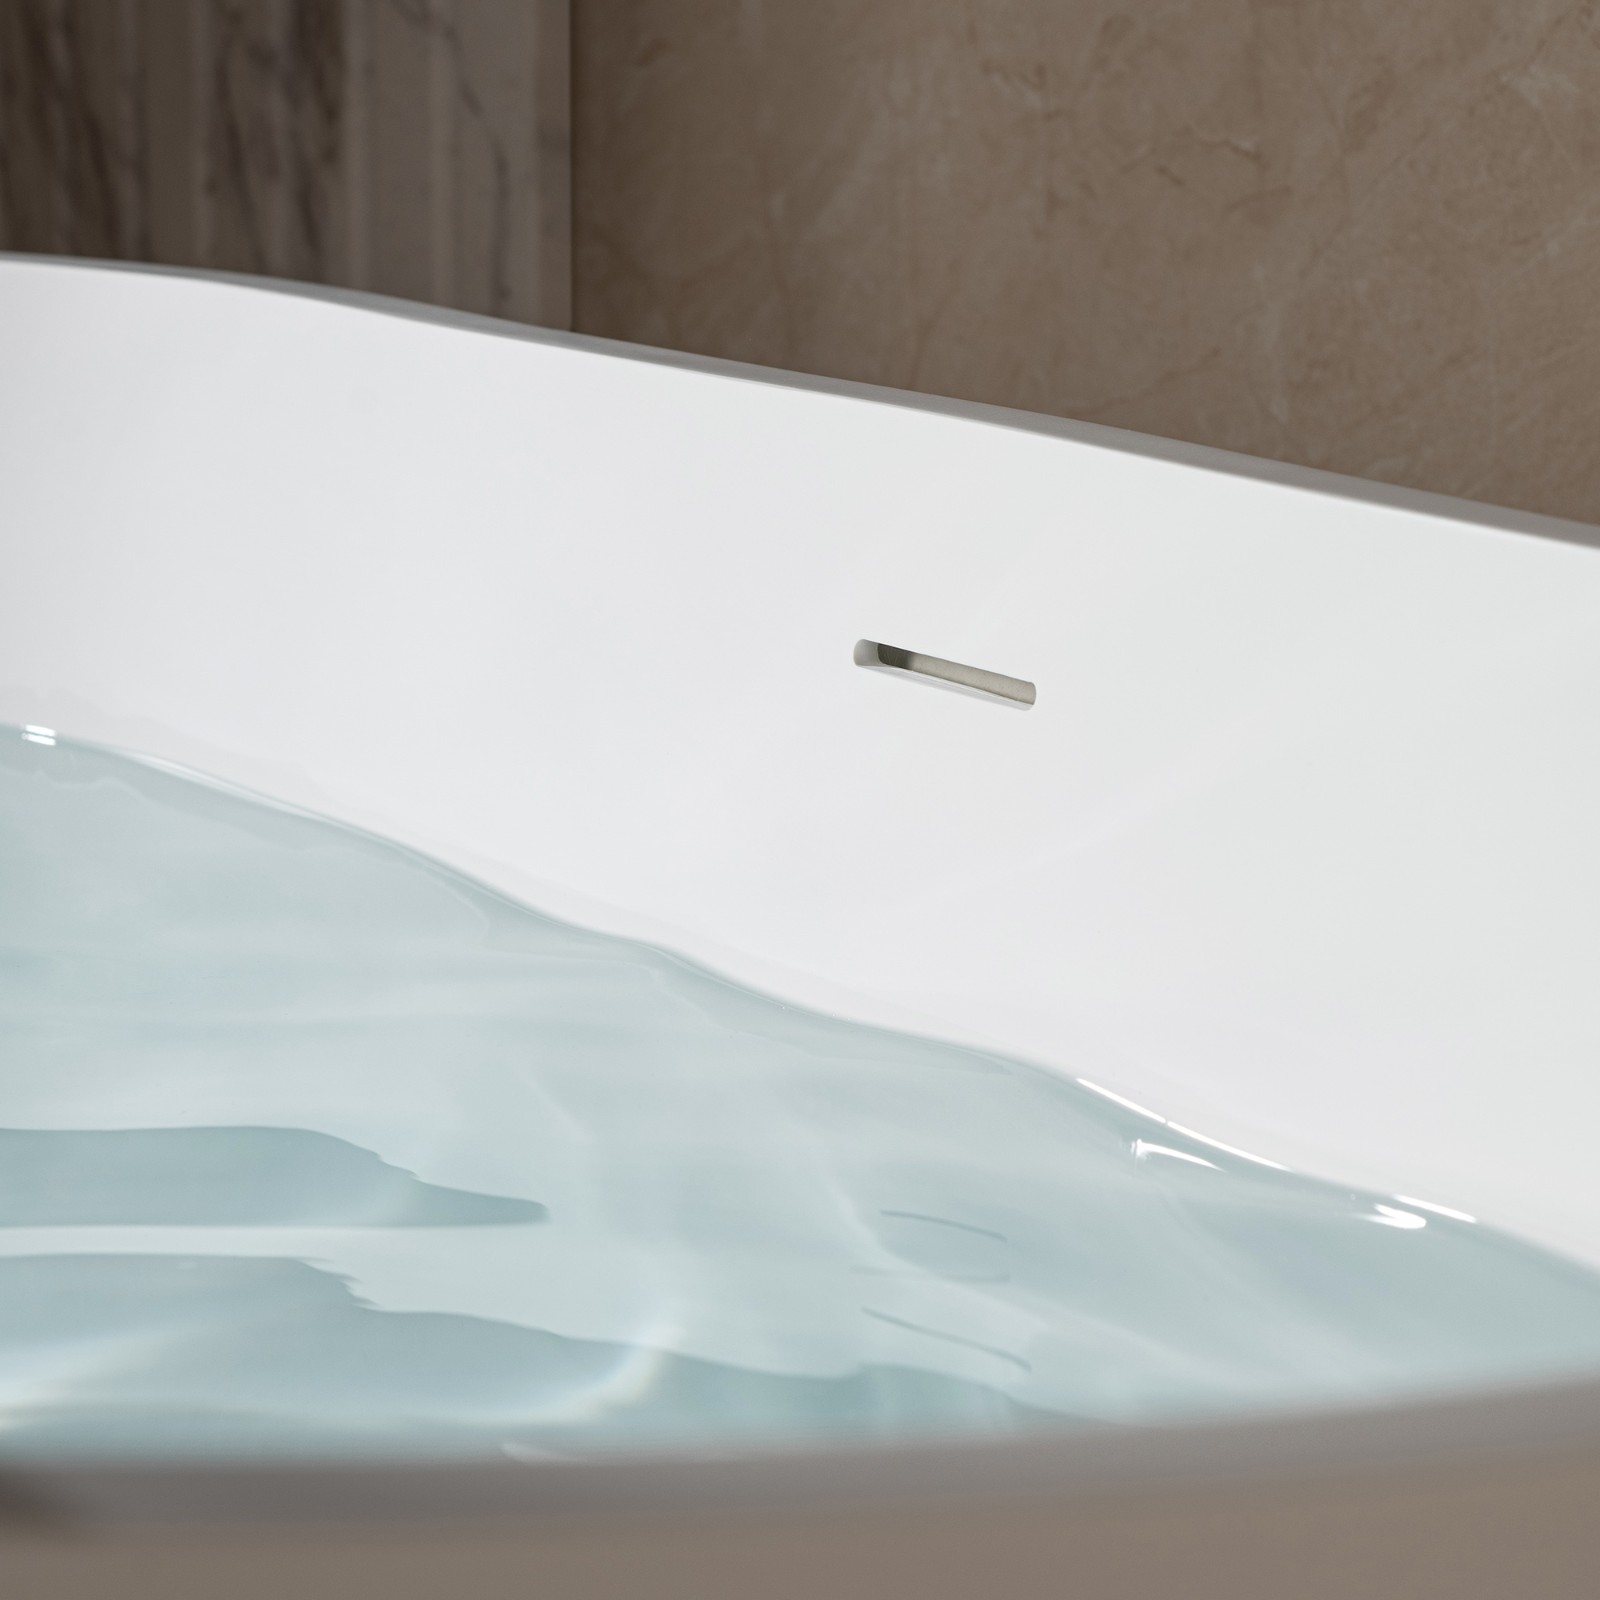  WOODBRIDGE 59 in. x 29 in. Luxury Contemporary Solid Surface Freestanding Bathtub in Matte White_651